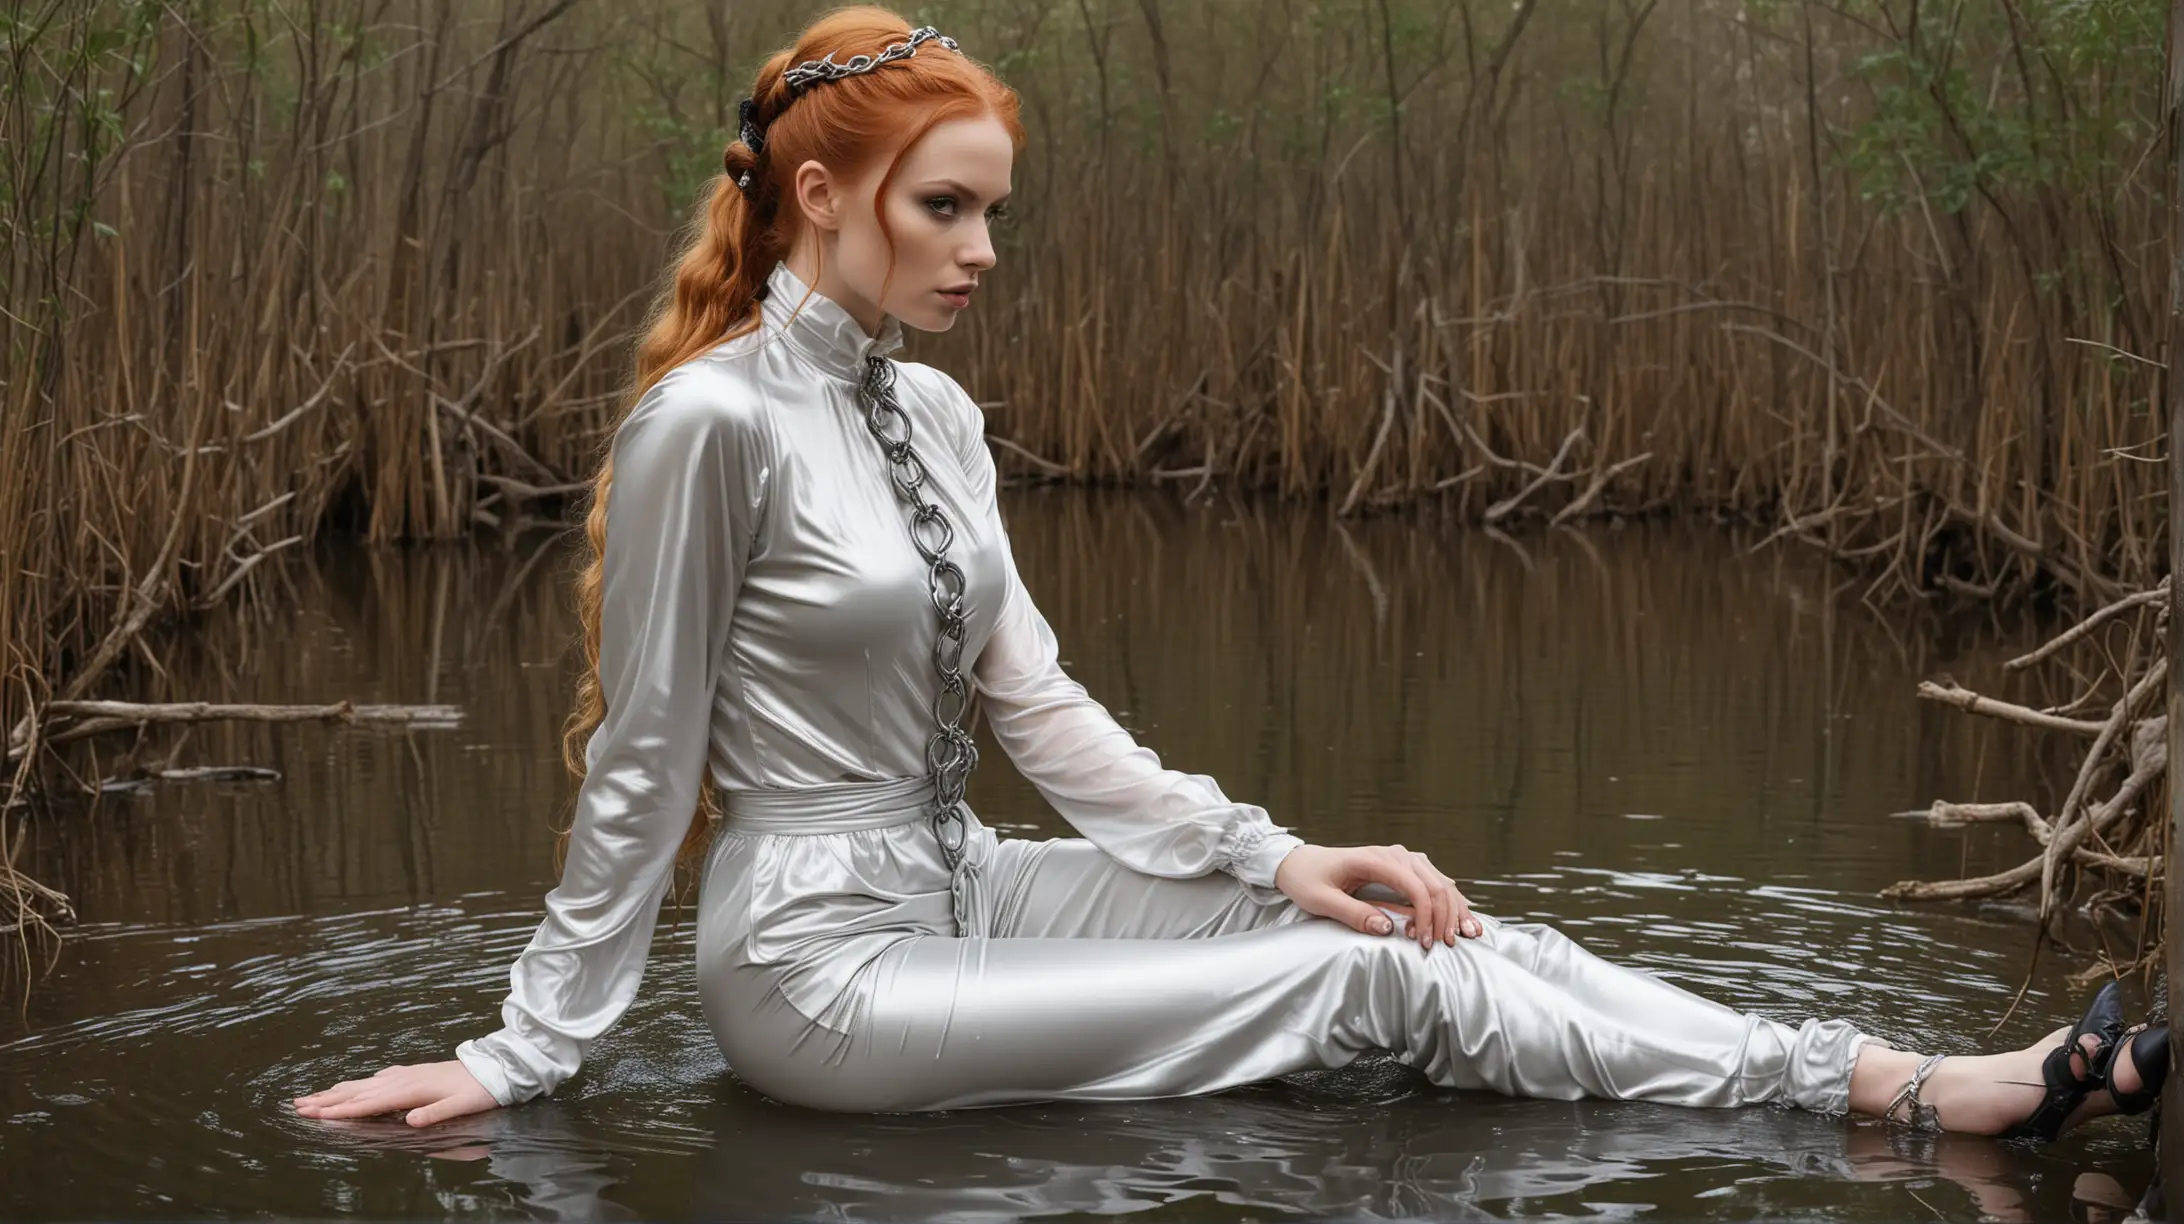 in prompt can be only one women Curlly ginger very long ponytail hair model Poses Nude  in Translucent platinium full-body satin suit lonf sleeves and long pants  in the style of a French maid outfit wet as  chained slave in swamp monster 